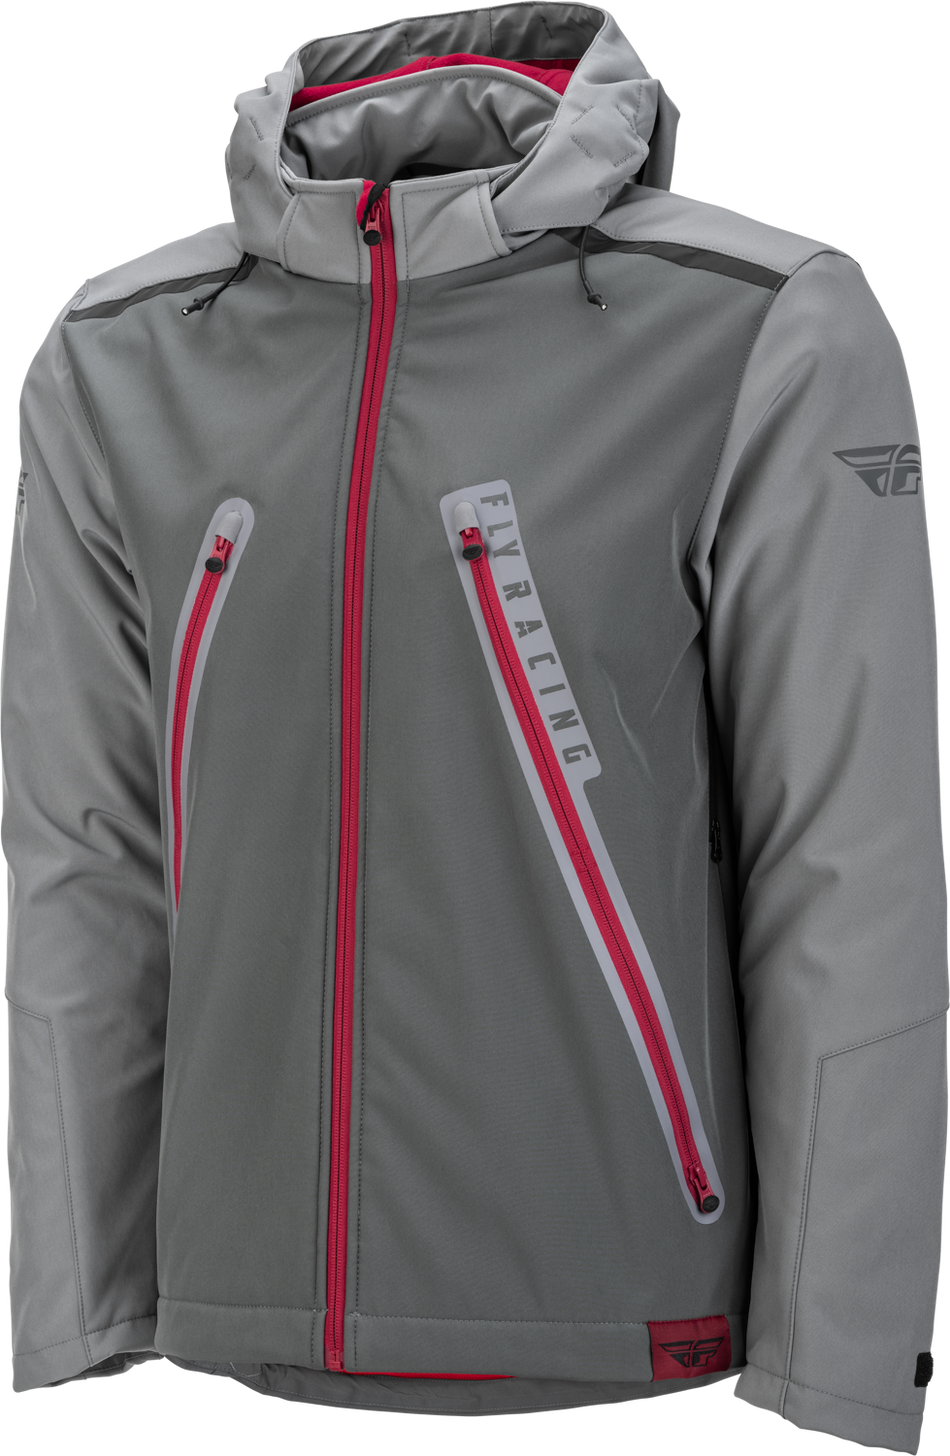 FLY RACING Carbyne Jacket Grey/Red Sm 477-4091S